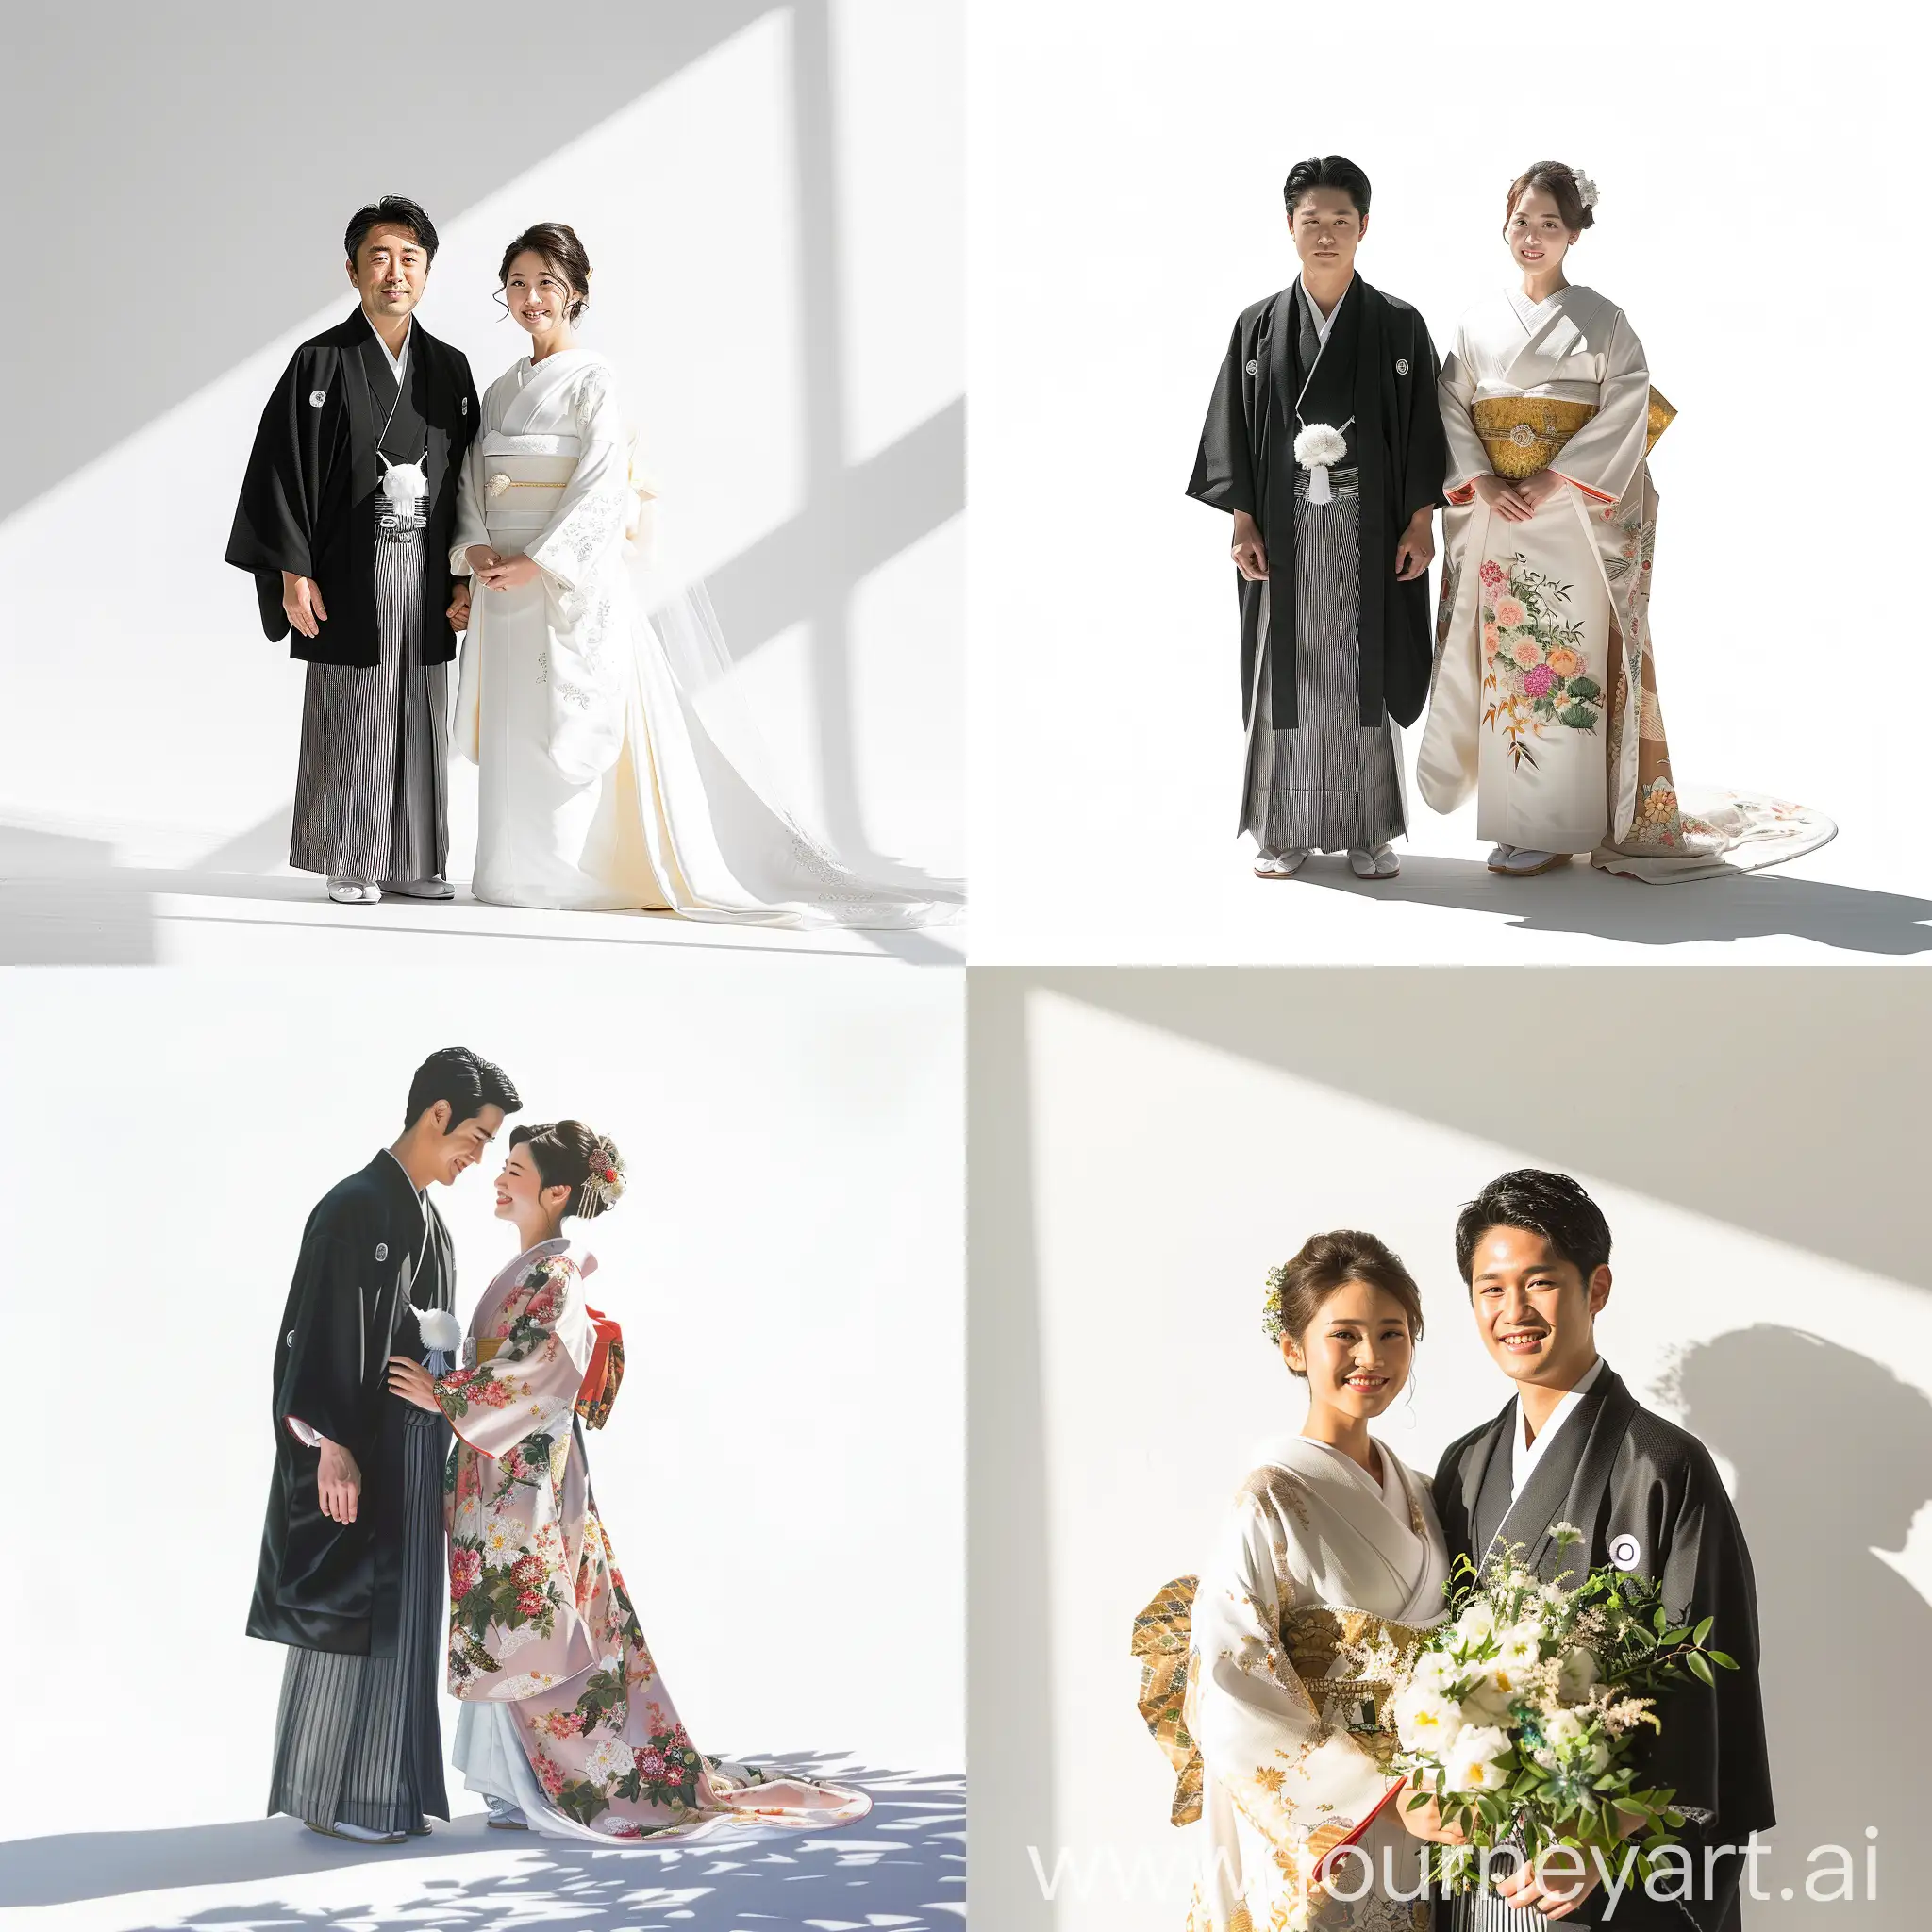 Japanese-Bride-and-Groom-Affectionately-Standing-Elegant-Wedding-Style-on-Clean-White-Background